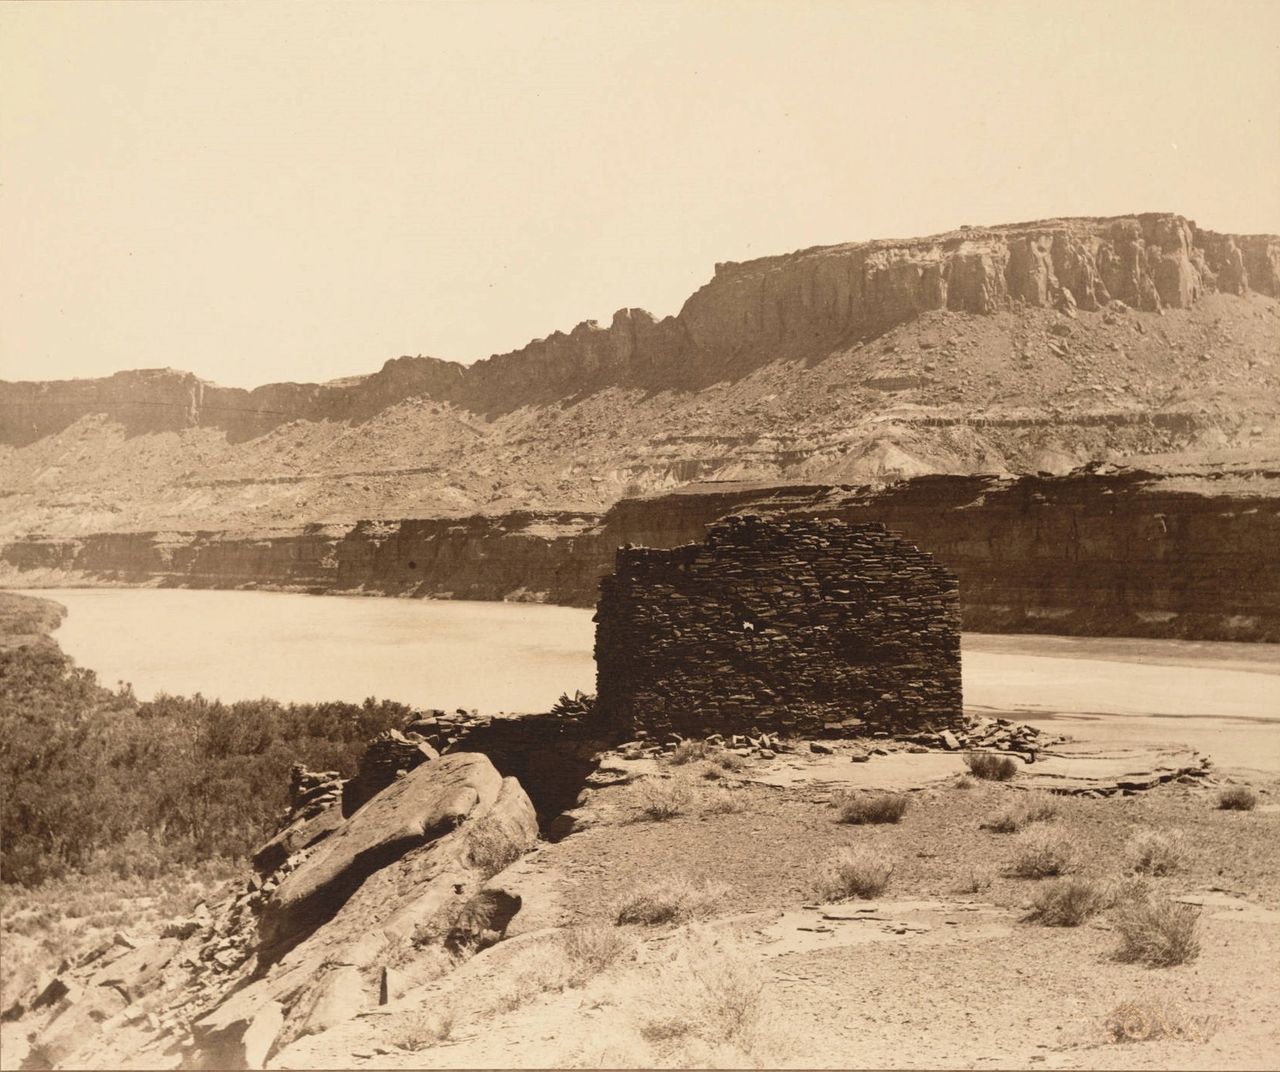 View of ruins of a prehistoric fort and the Vermilion Cliffs of Arizona, taken during the Brown-Stanton survey of the Colorado River's canyons in 1889. Photographer Frederick Monsen noted, There are many remarkable ruins in this vicinity but the country is very difficult to travel over.